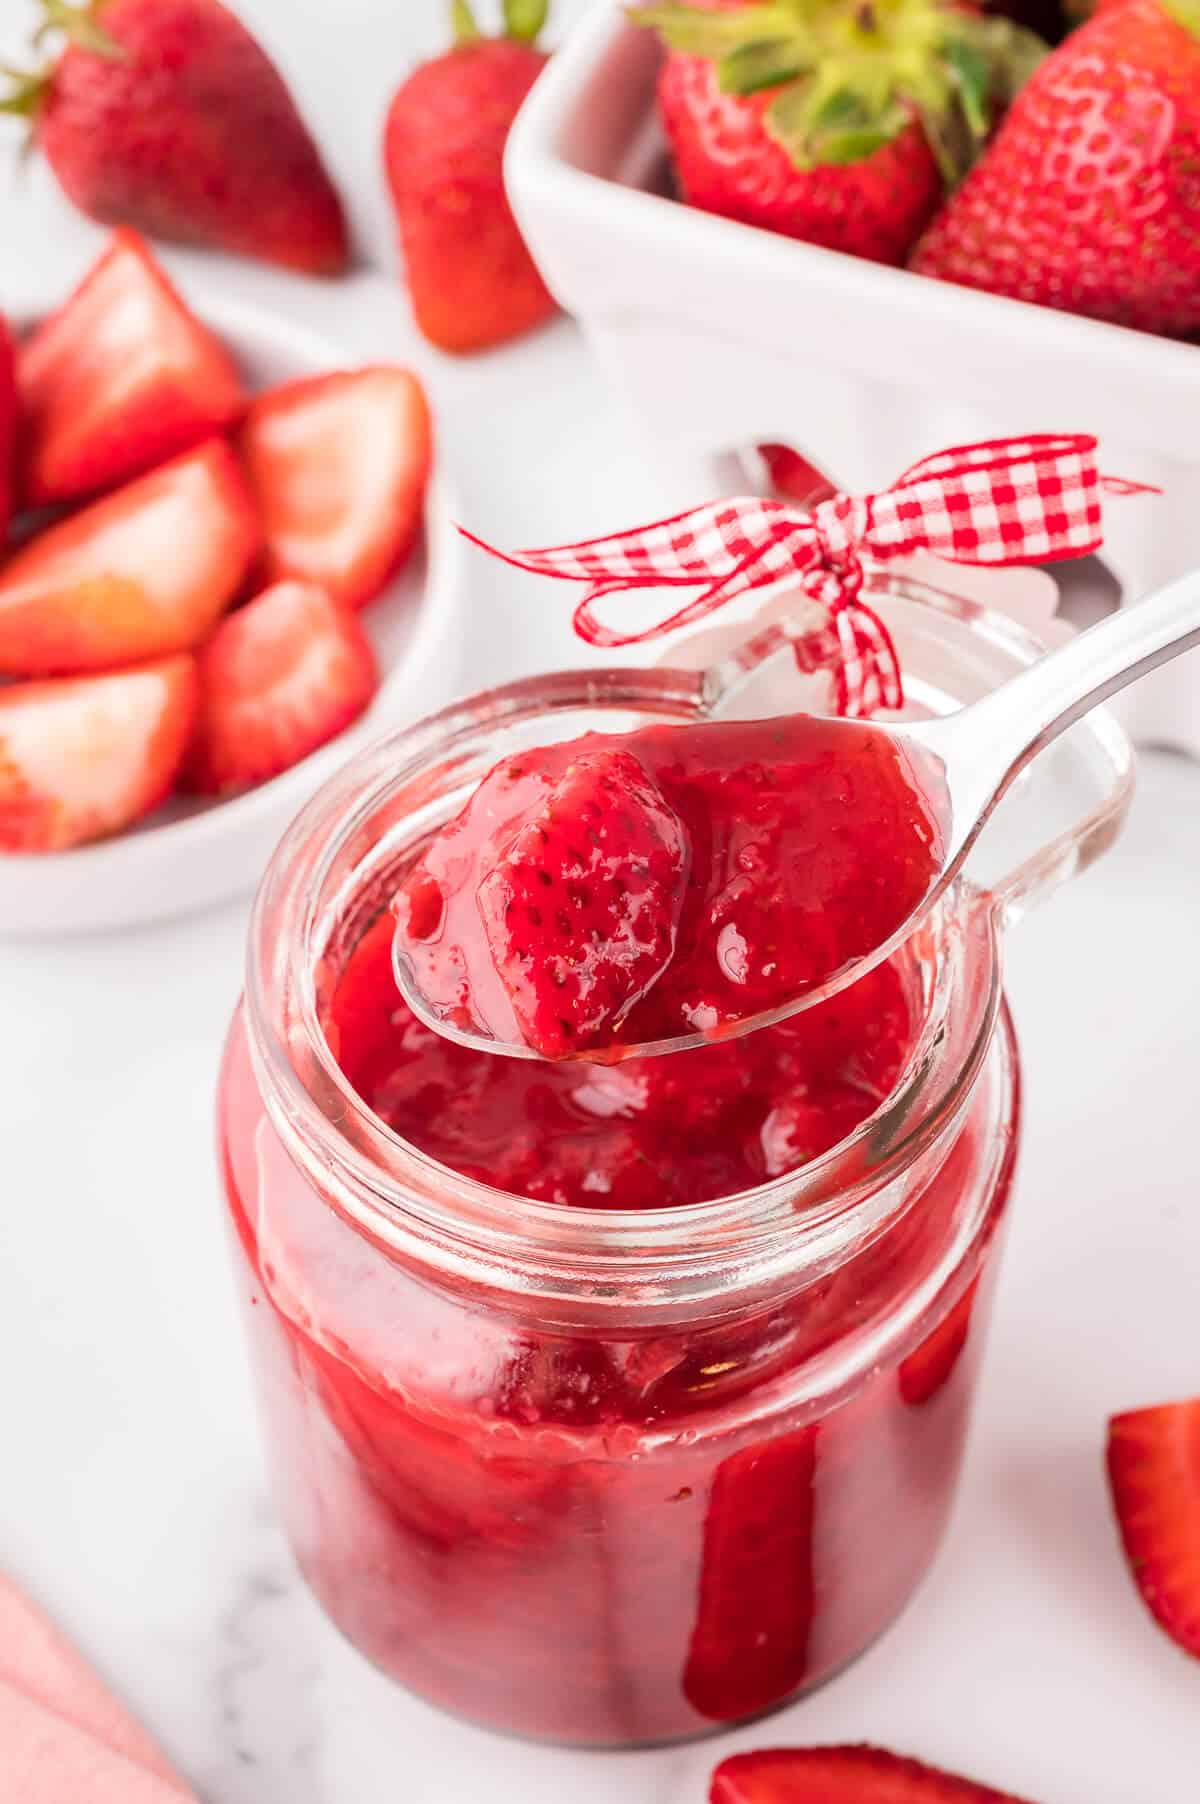 Strawberry sauce in a jar with a spoon.